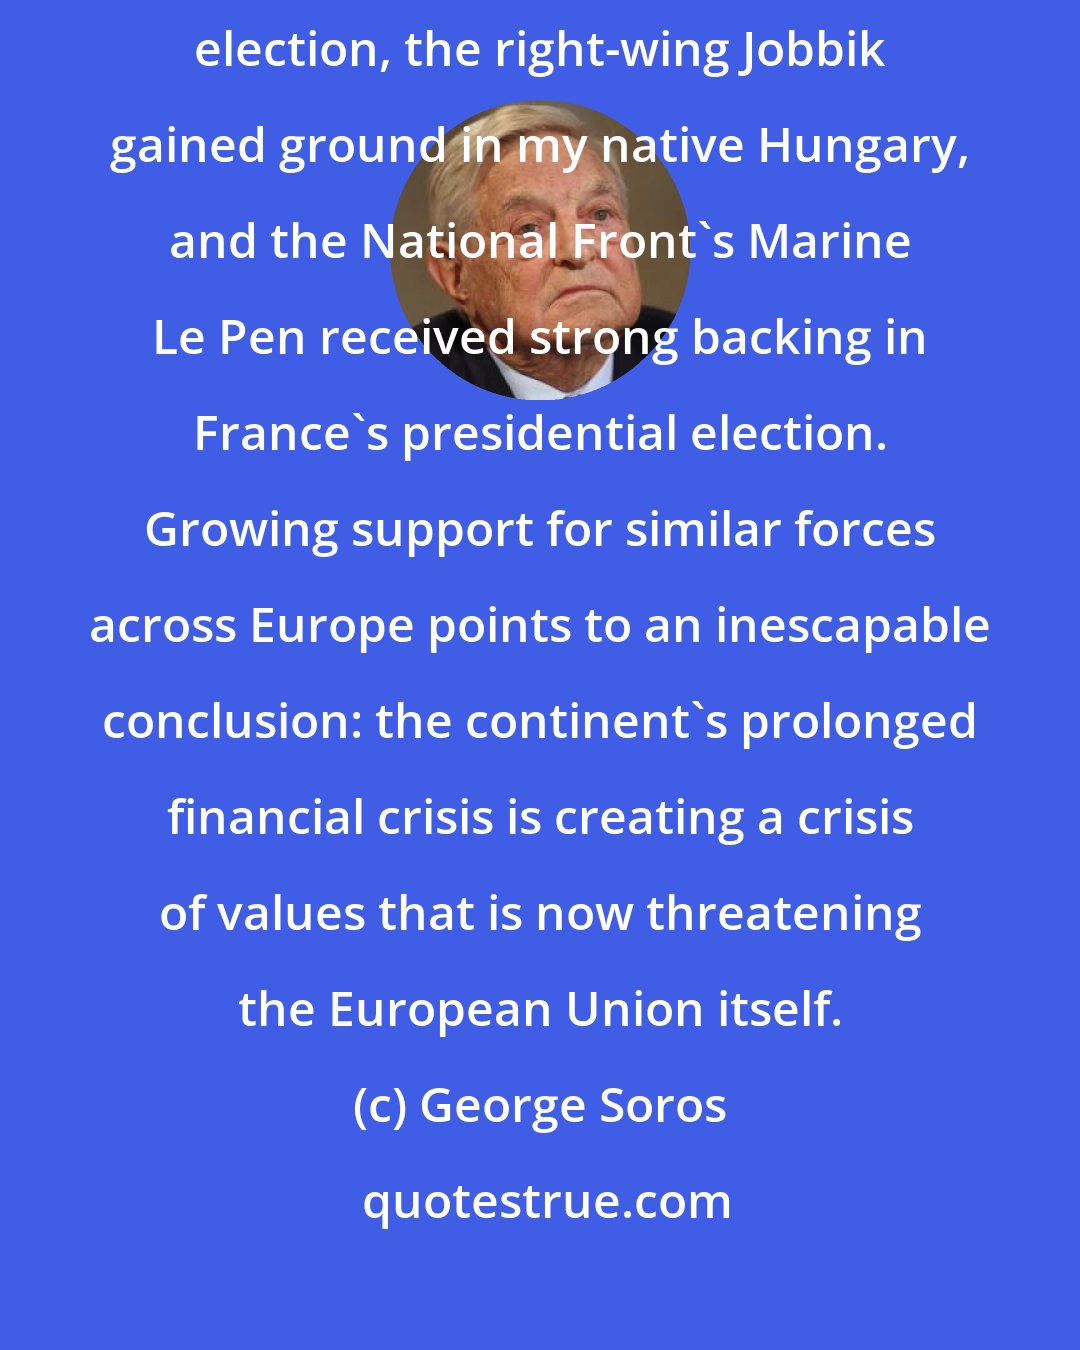 George Soros: In 2012, the far-right Golden Dawn won 21 seats in Greece's parliamentary election, the right-wing Jobbik gained ground in my native Hungary, and the National Front's Marine Le Pen received strong backing in France's presidential election. Growing support for similar forces across Europe points to an inescapable conclusion: the continent's prolonged financial crisis is creating a crisis of values that is now threatening the European Union itself.